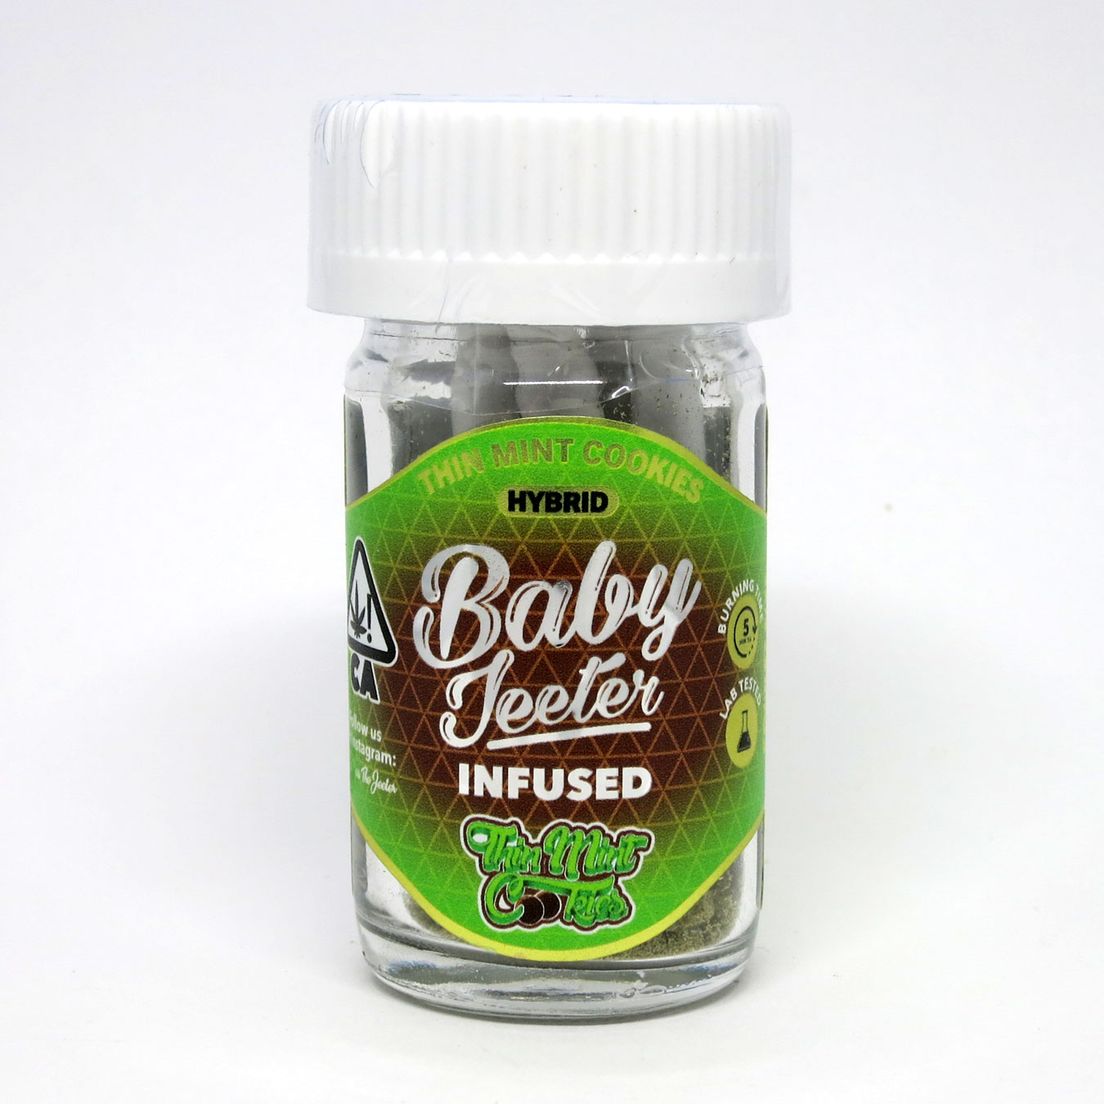 BABY Jeeter Infused 5pk Thin Mint